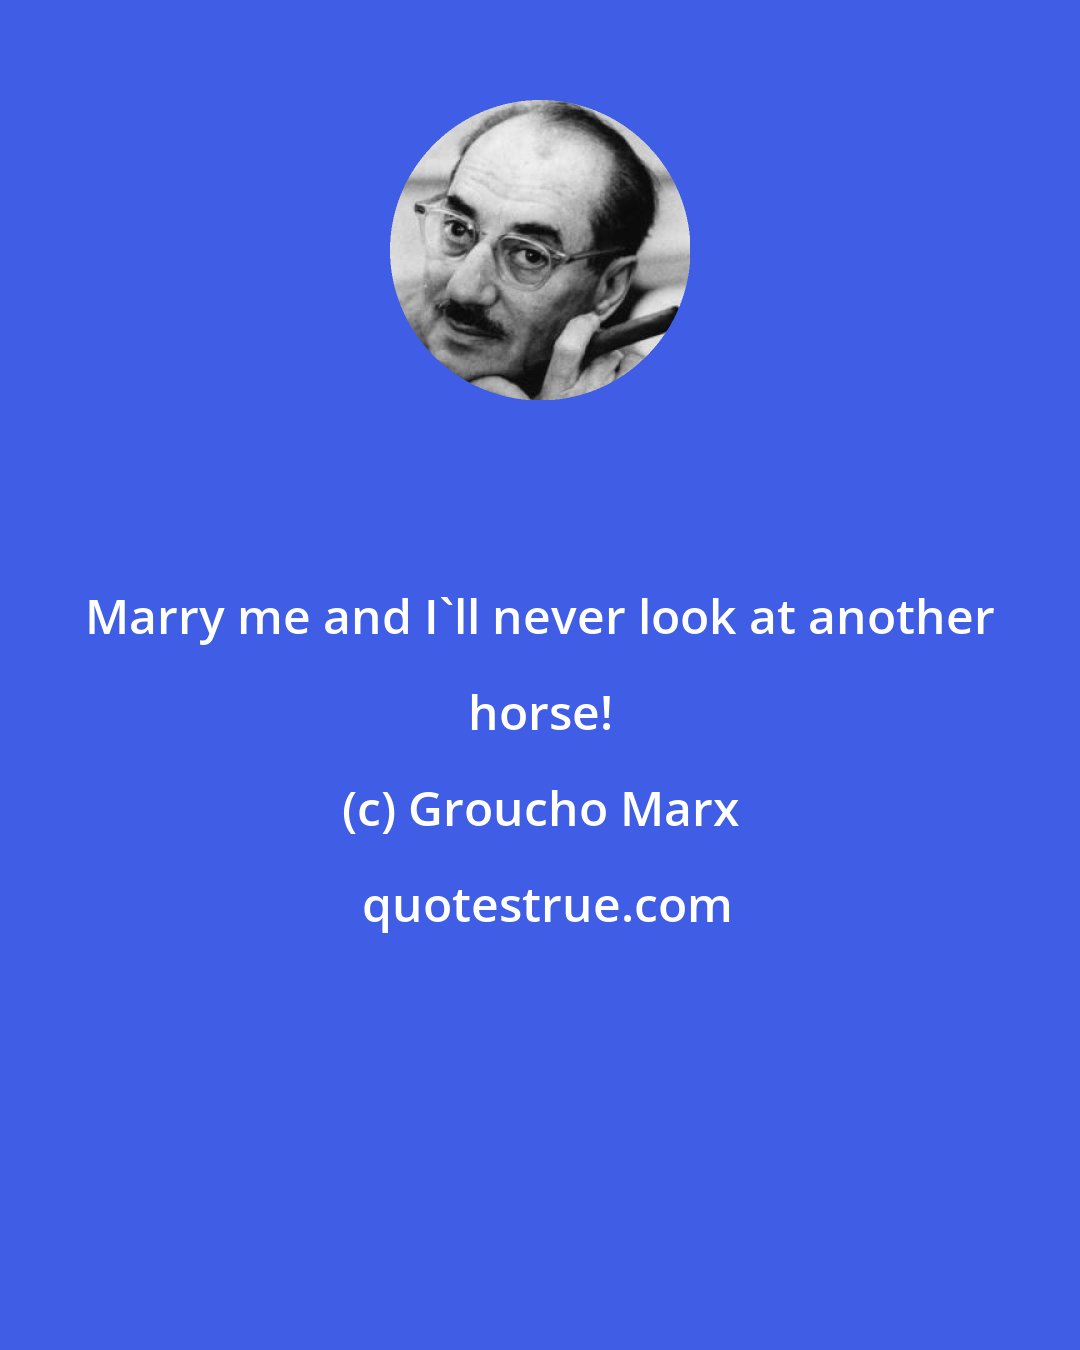 Groucho Marx: Marry me and I'll never look at another horse!